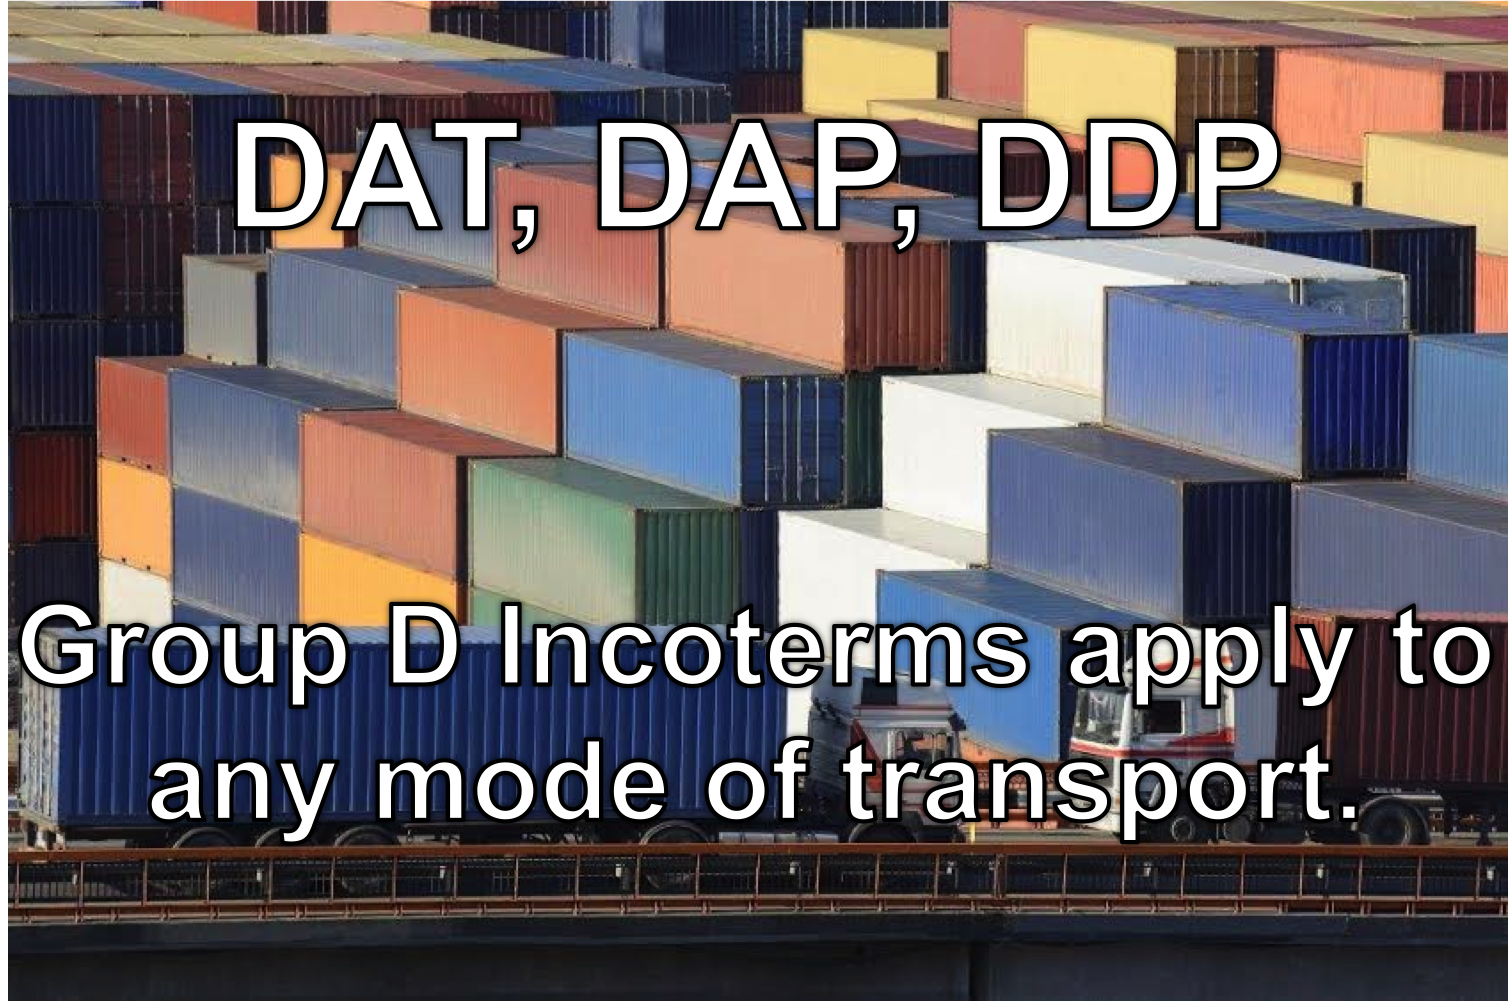 Incoterms Definitions Dat Dap Ddp Universal Shipping News